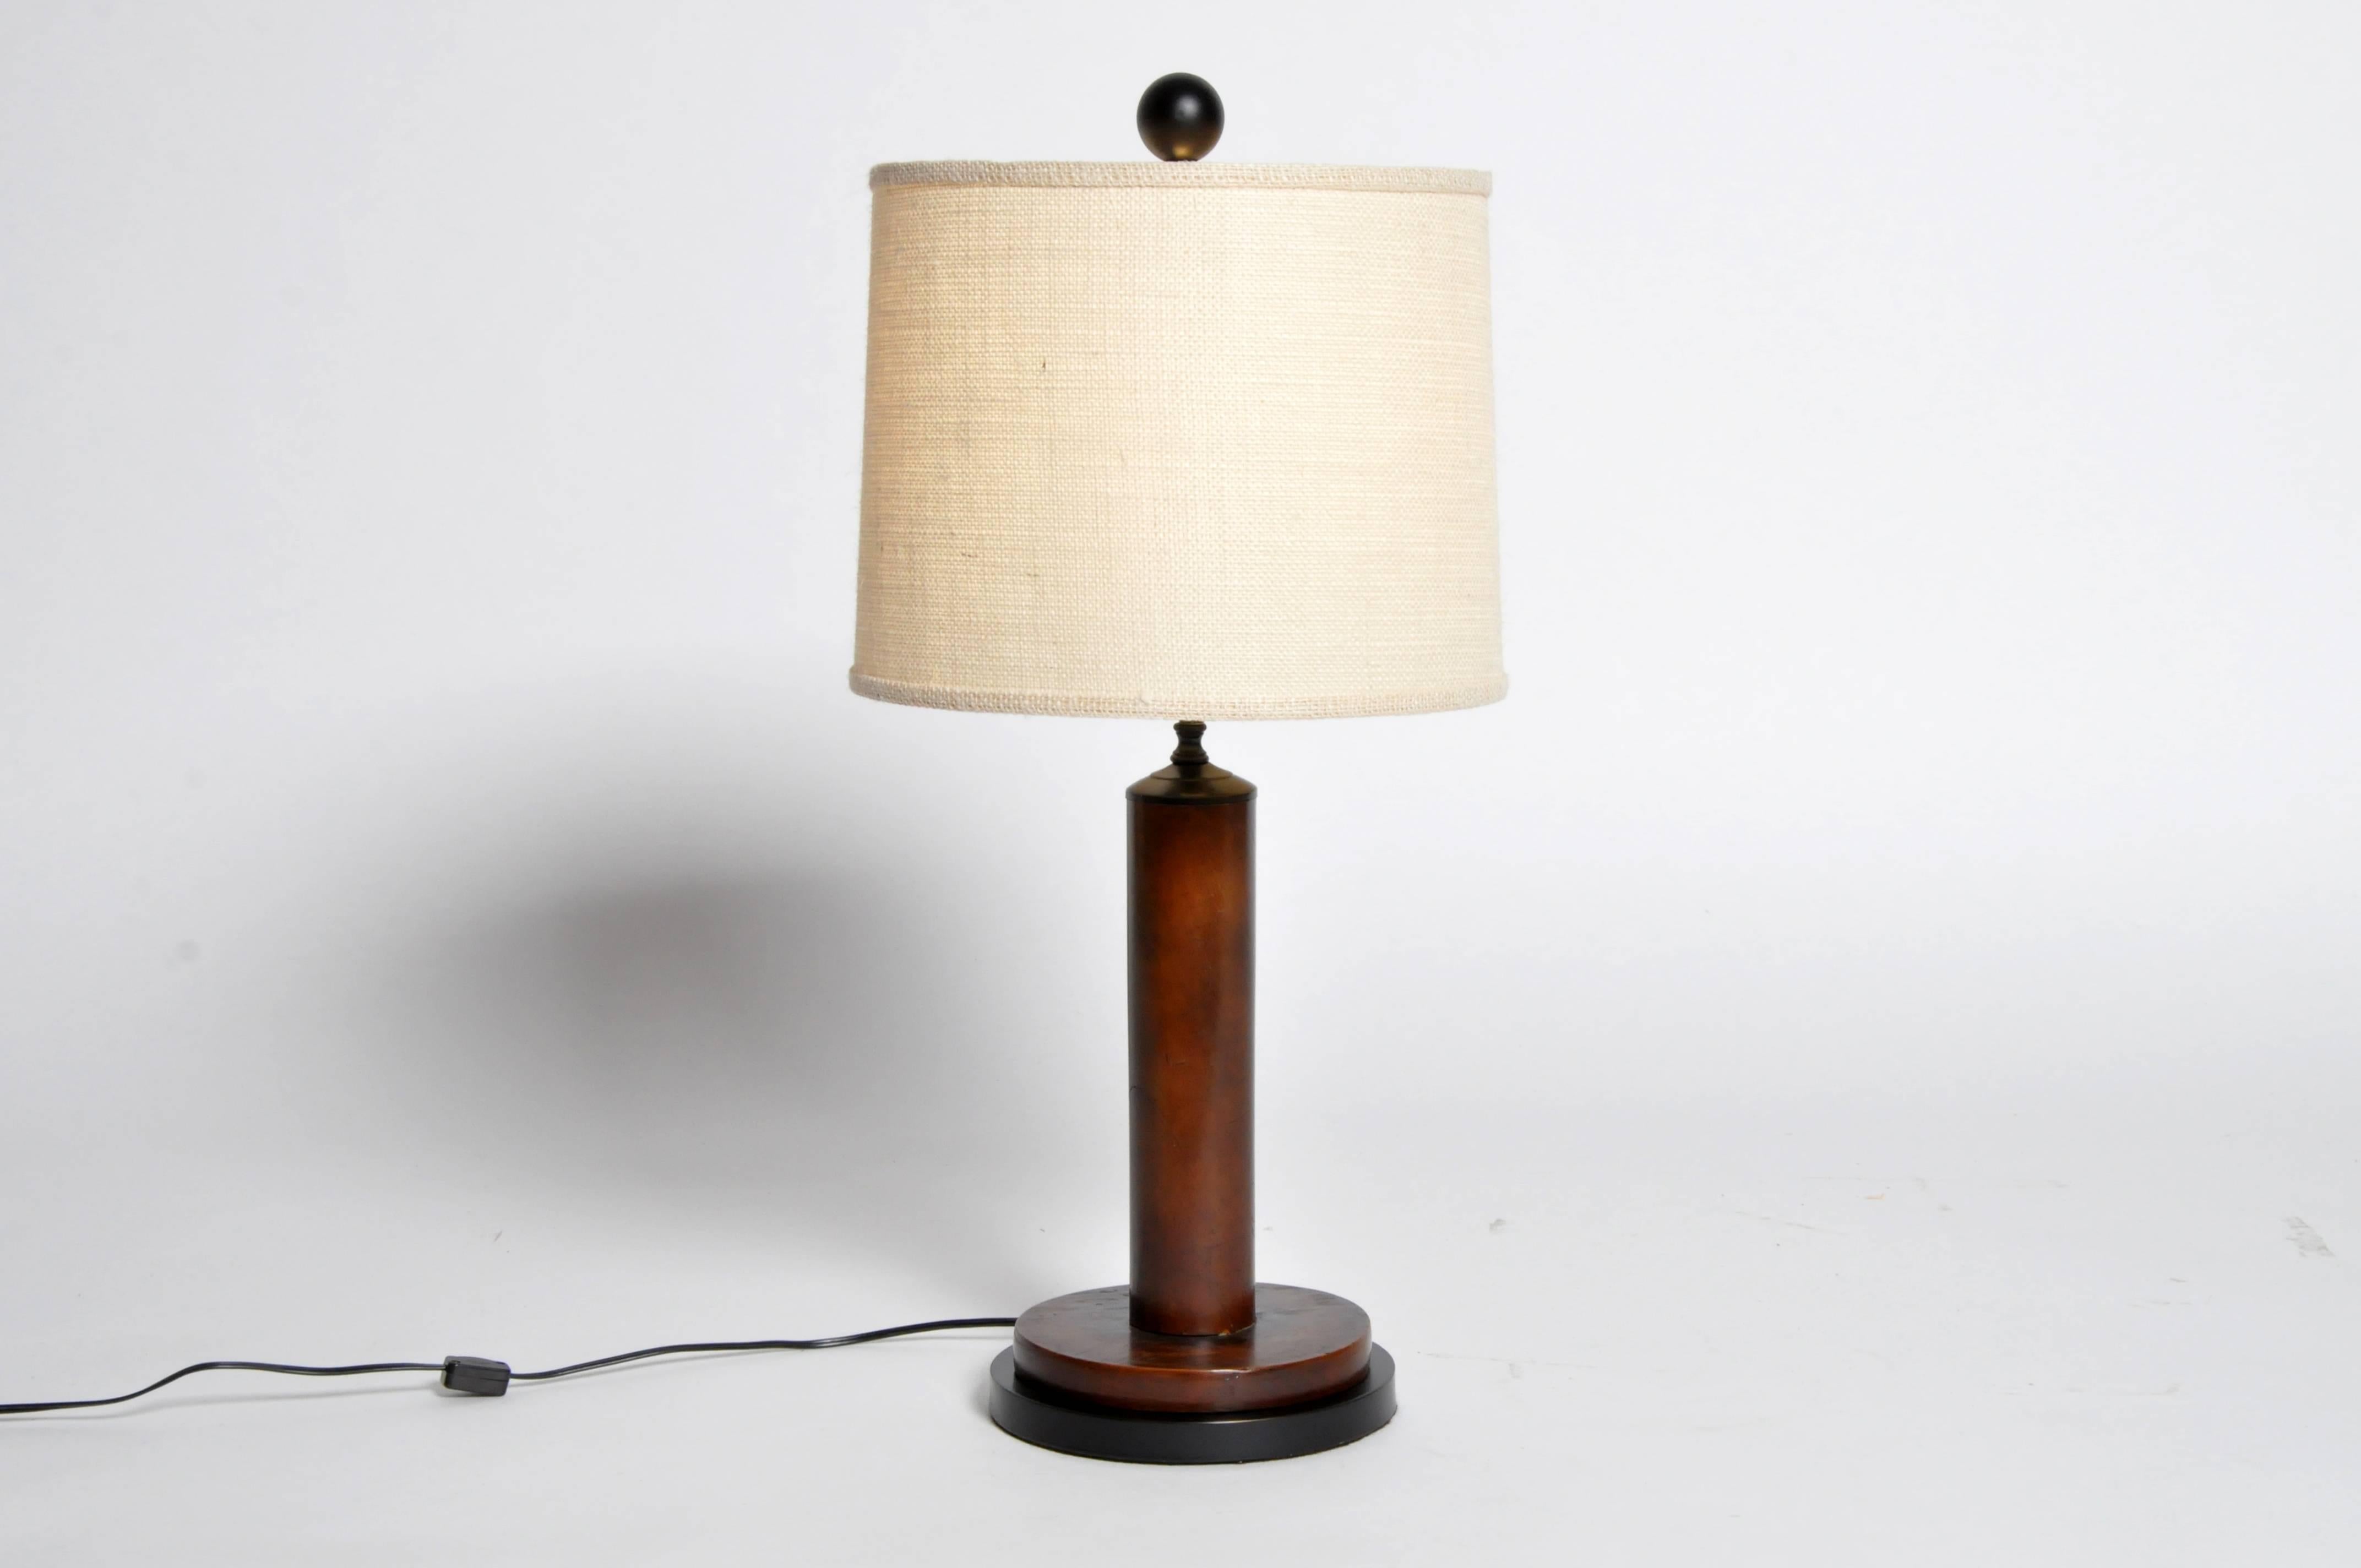 These simple British Colonial teak wood lamps retain their original varnish. They have been rewired and fitted with modern shades and lamp hardware.